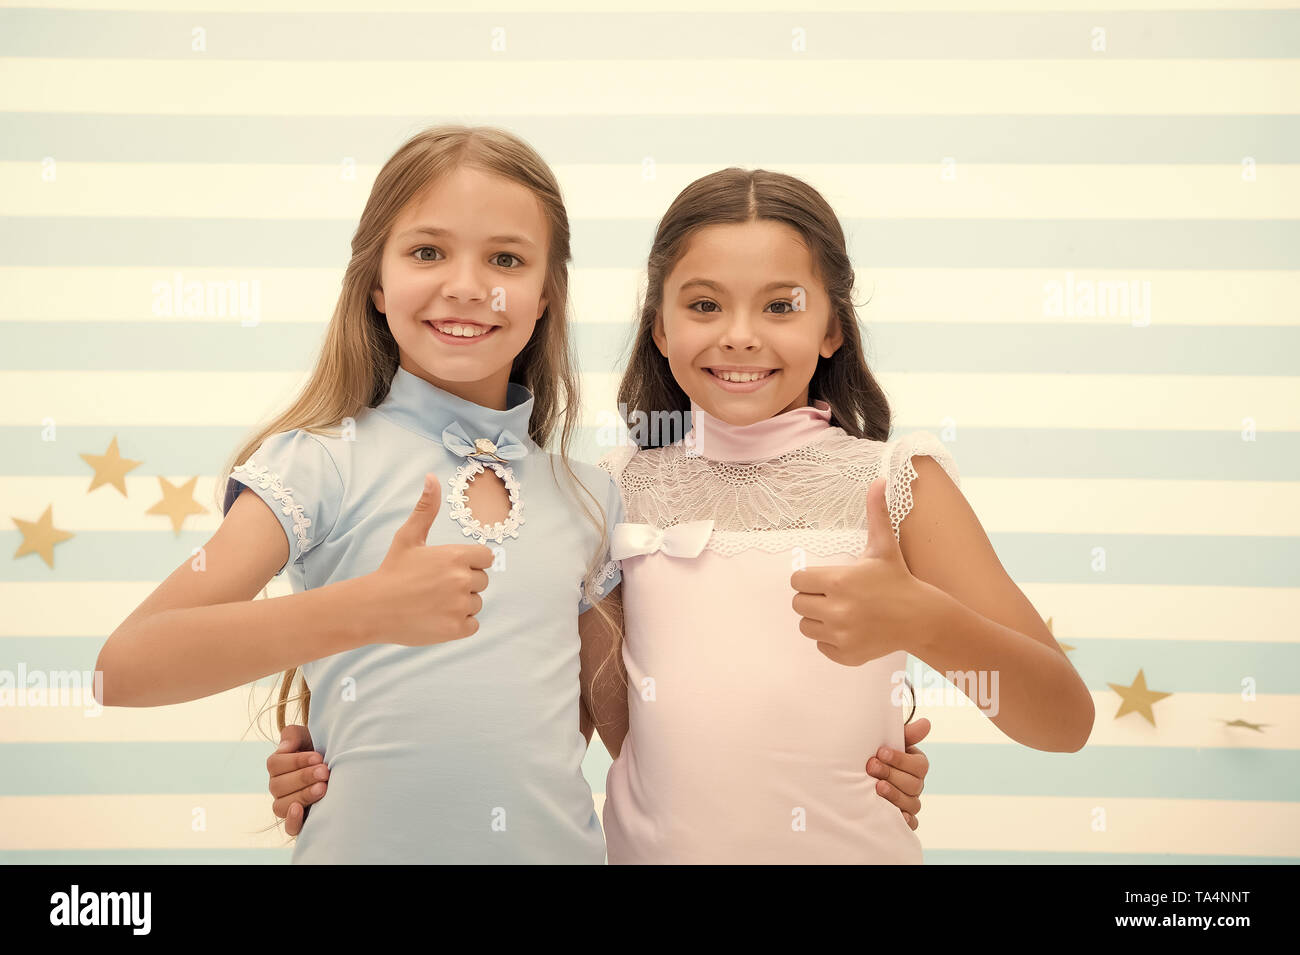 Girls smiling happy faces hug each other and show thumbs up gesture. Girls children best friends hugs. Happy childhood concept. Kids schoolgirls preteens happy together. Friendship from childhood. Stock Photo